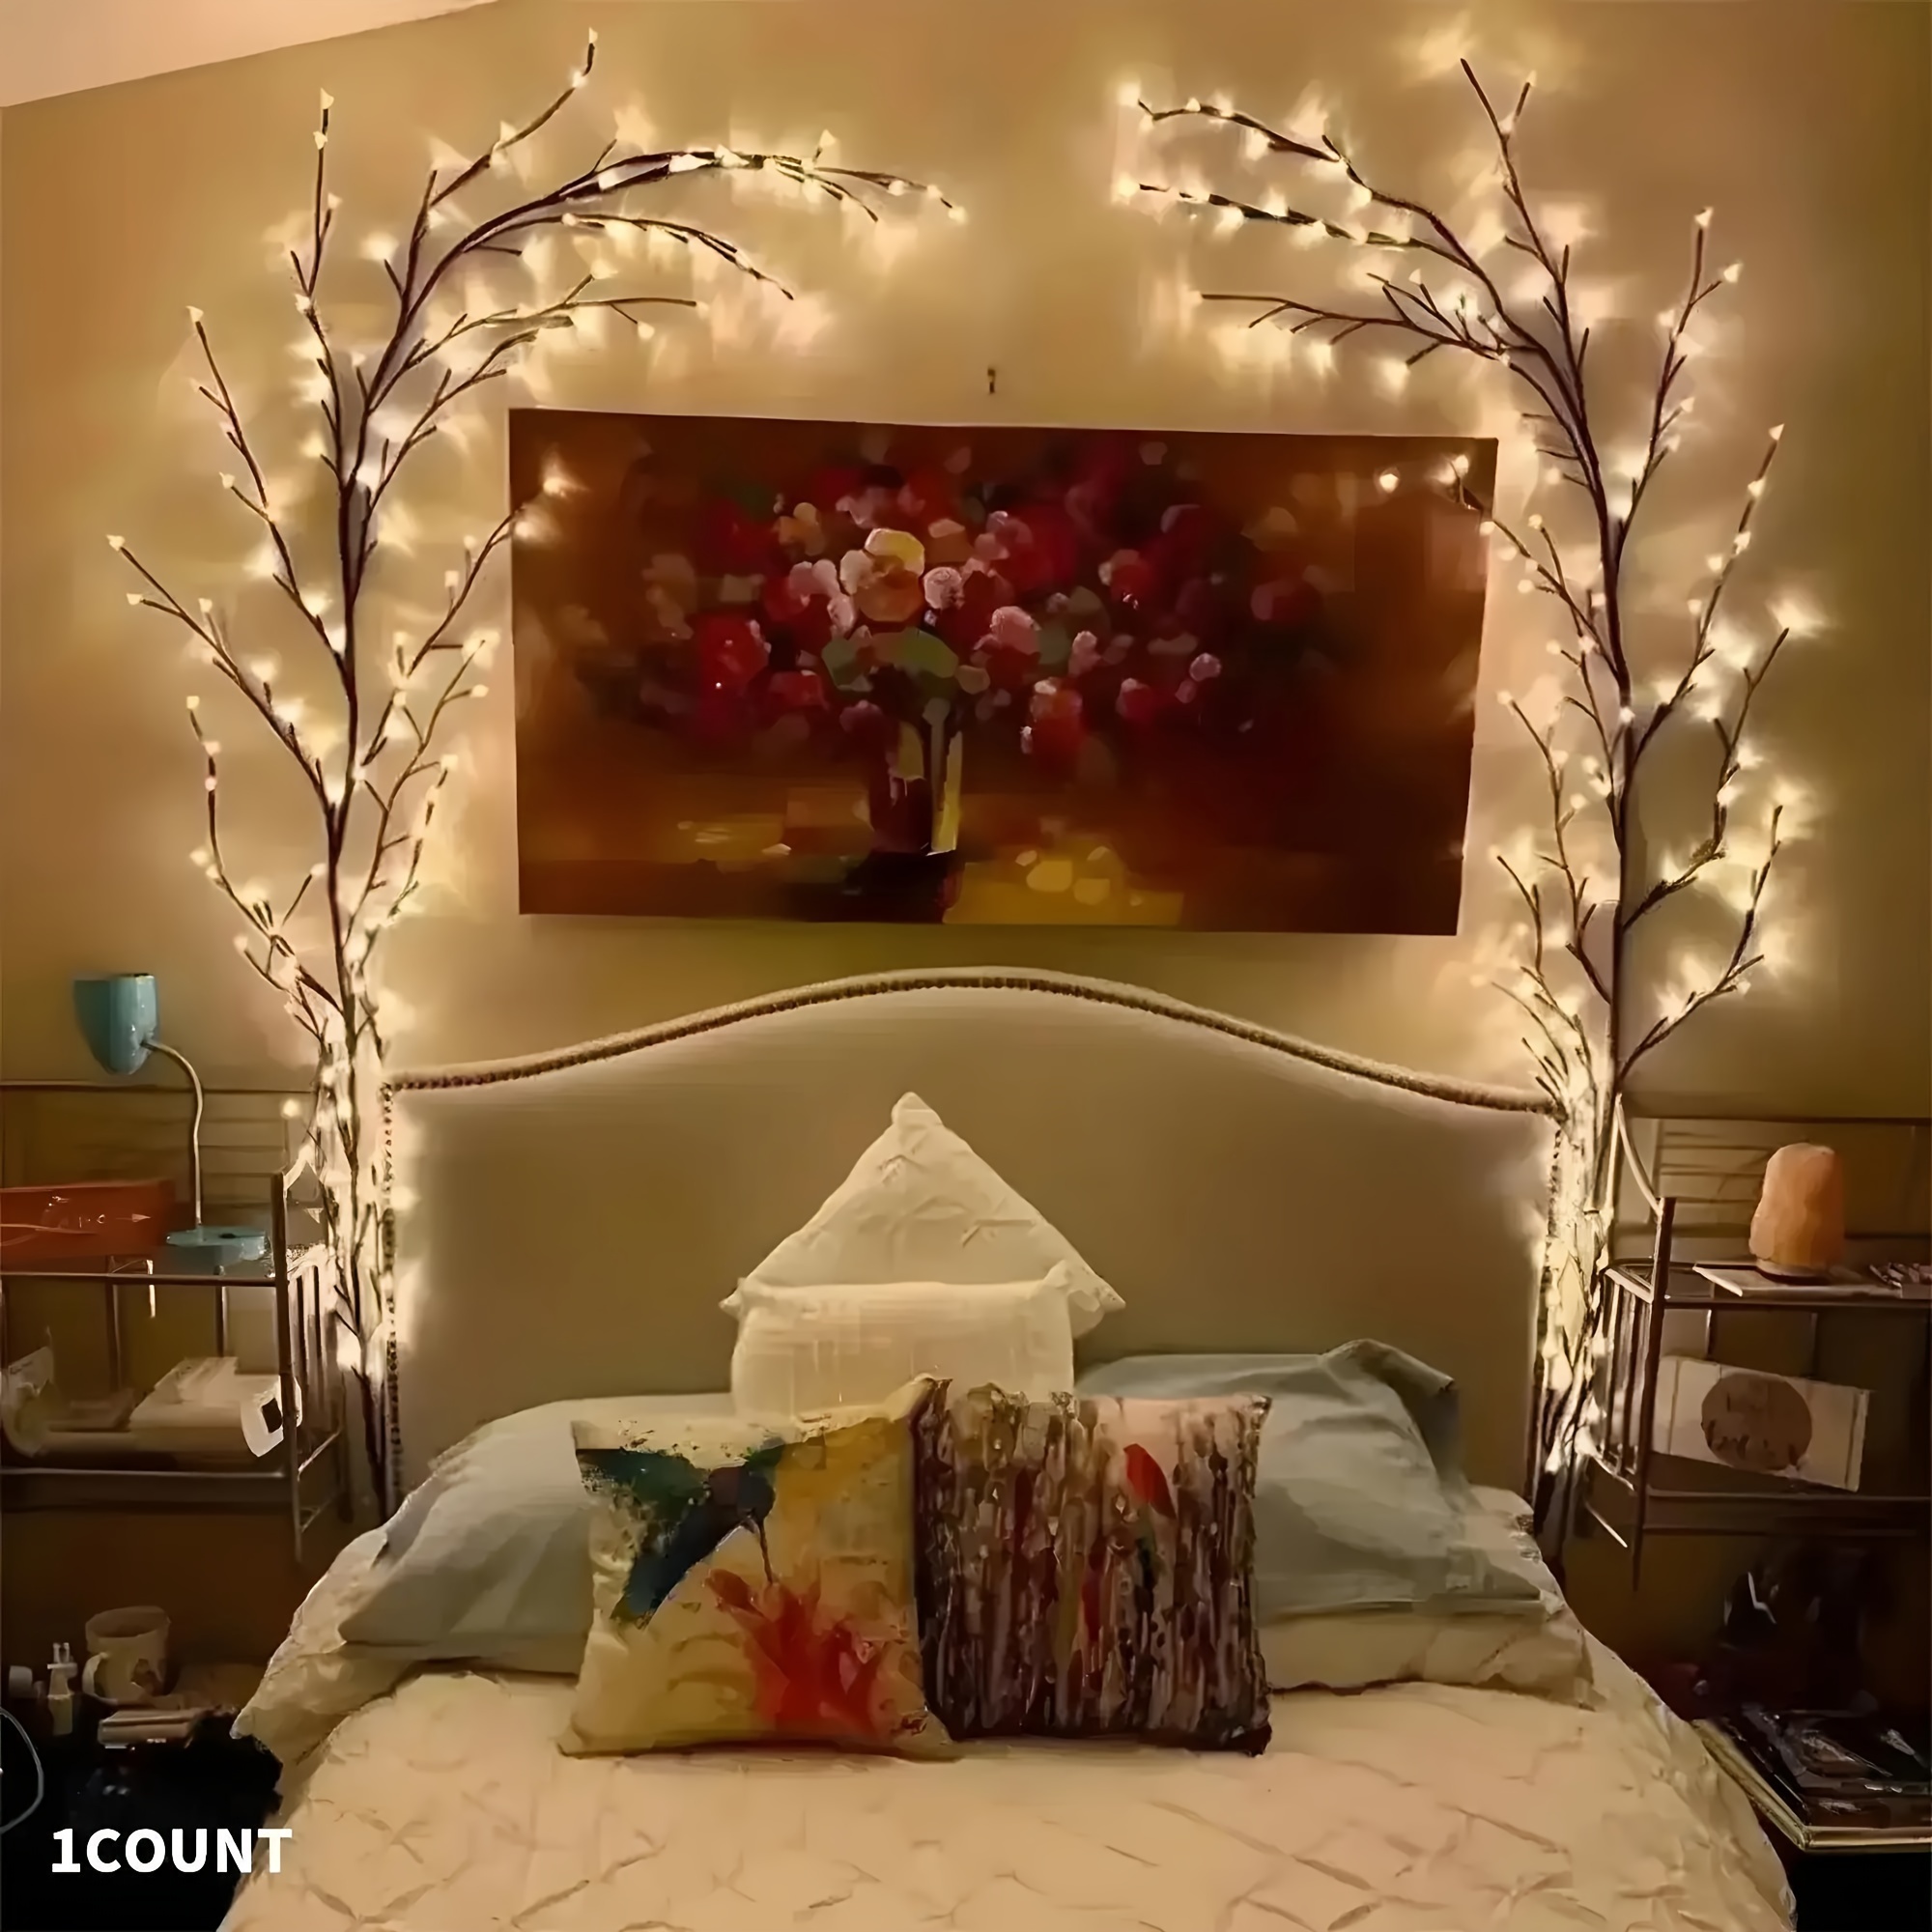 

1pcs 144 Led Branch Cane Light Is Suitable For Outdoor Decoration Of Living Room Bedroom New Year's Day Valentine's Day Easter Thanksgiving And Other Holiday Party Decoration